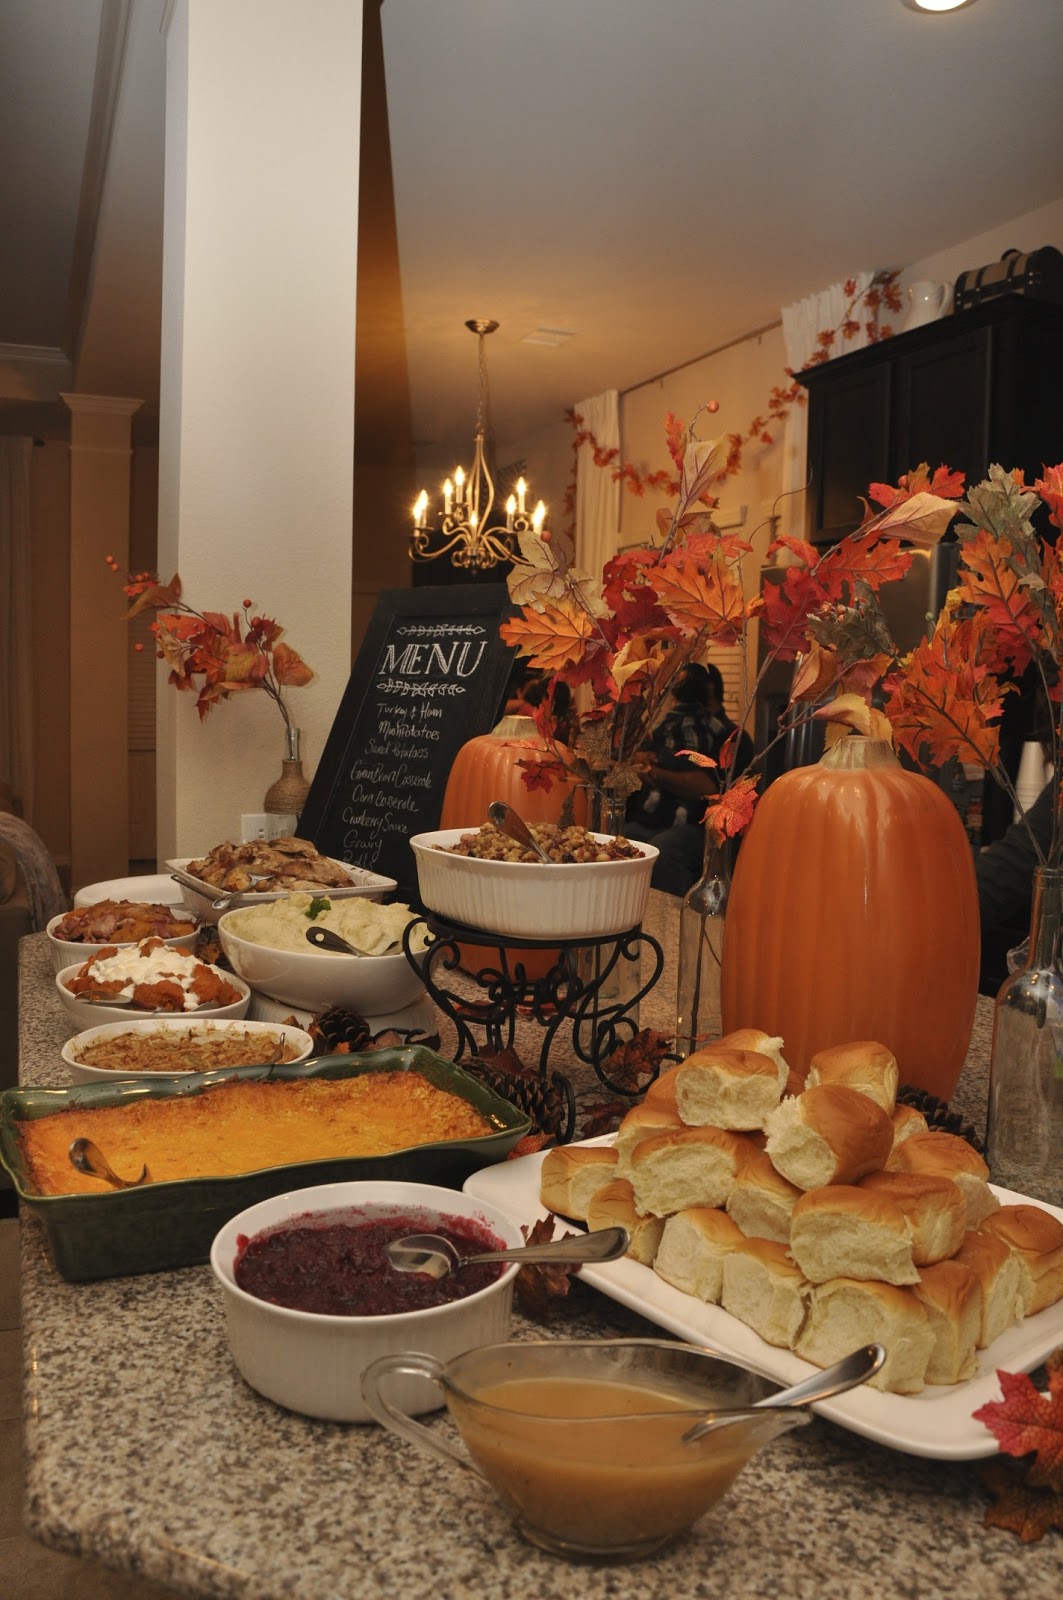 Life. Love. Home. Faith.:And seek to show hospitality - Thanksgiving 2022 Dinner And Decorating Ideas